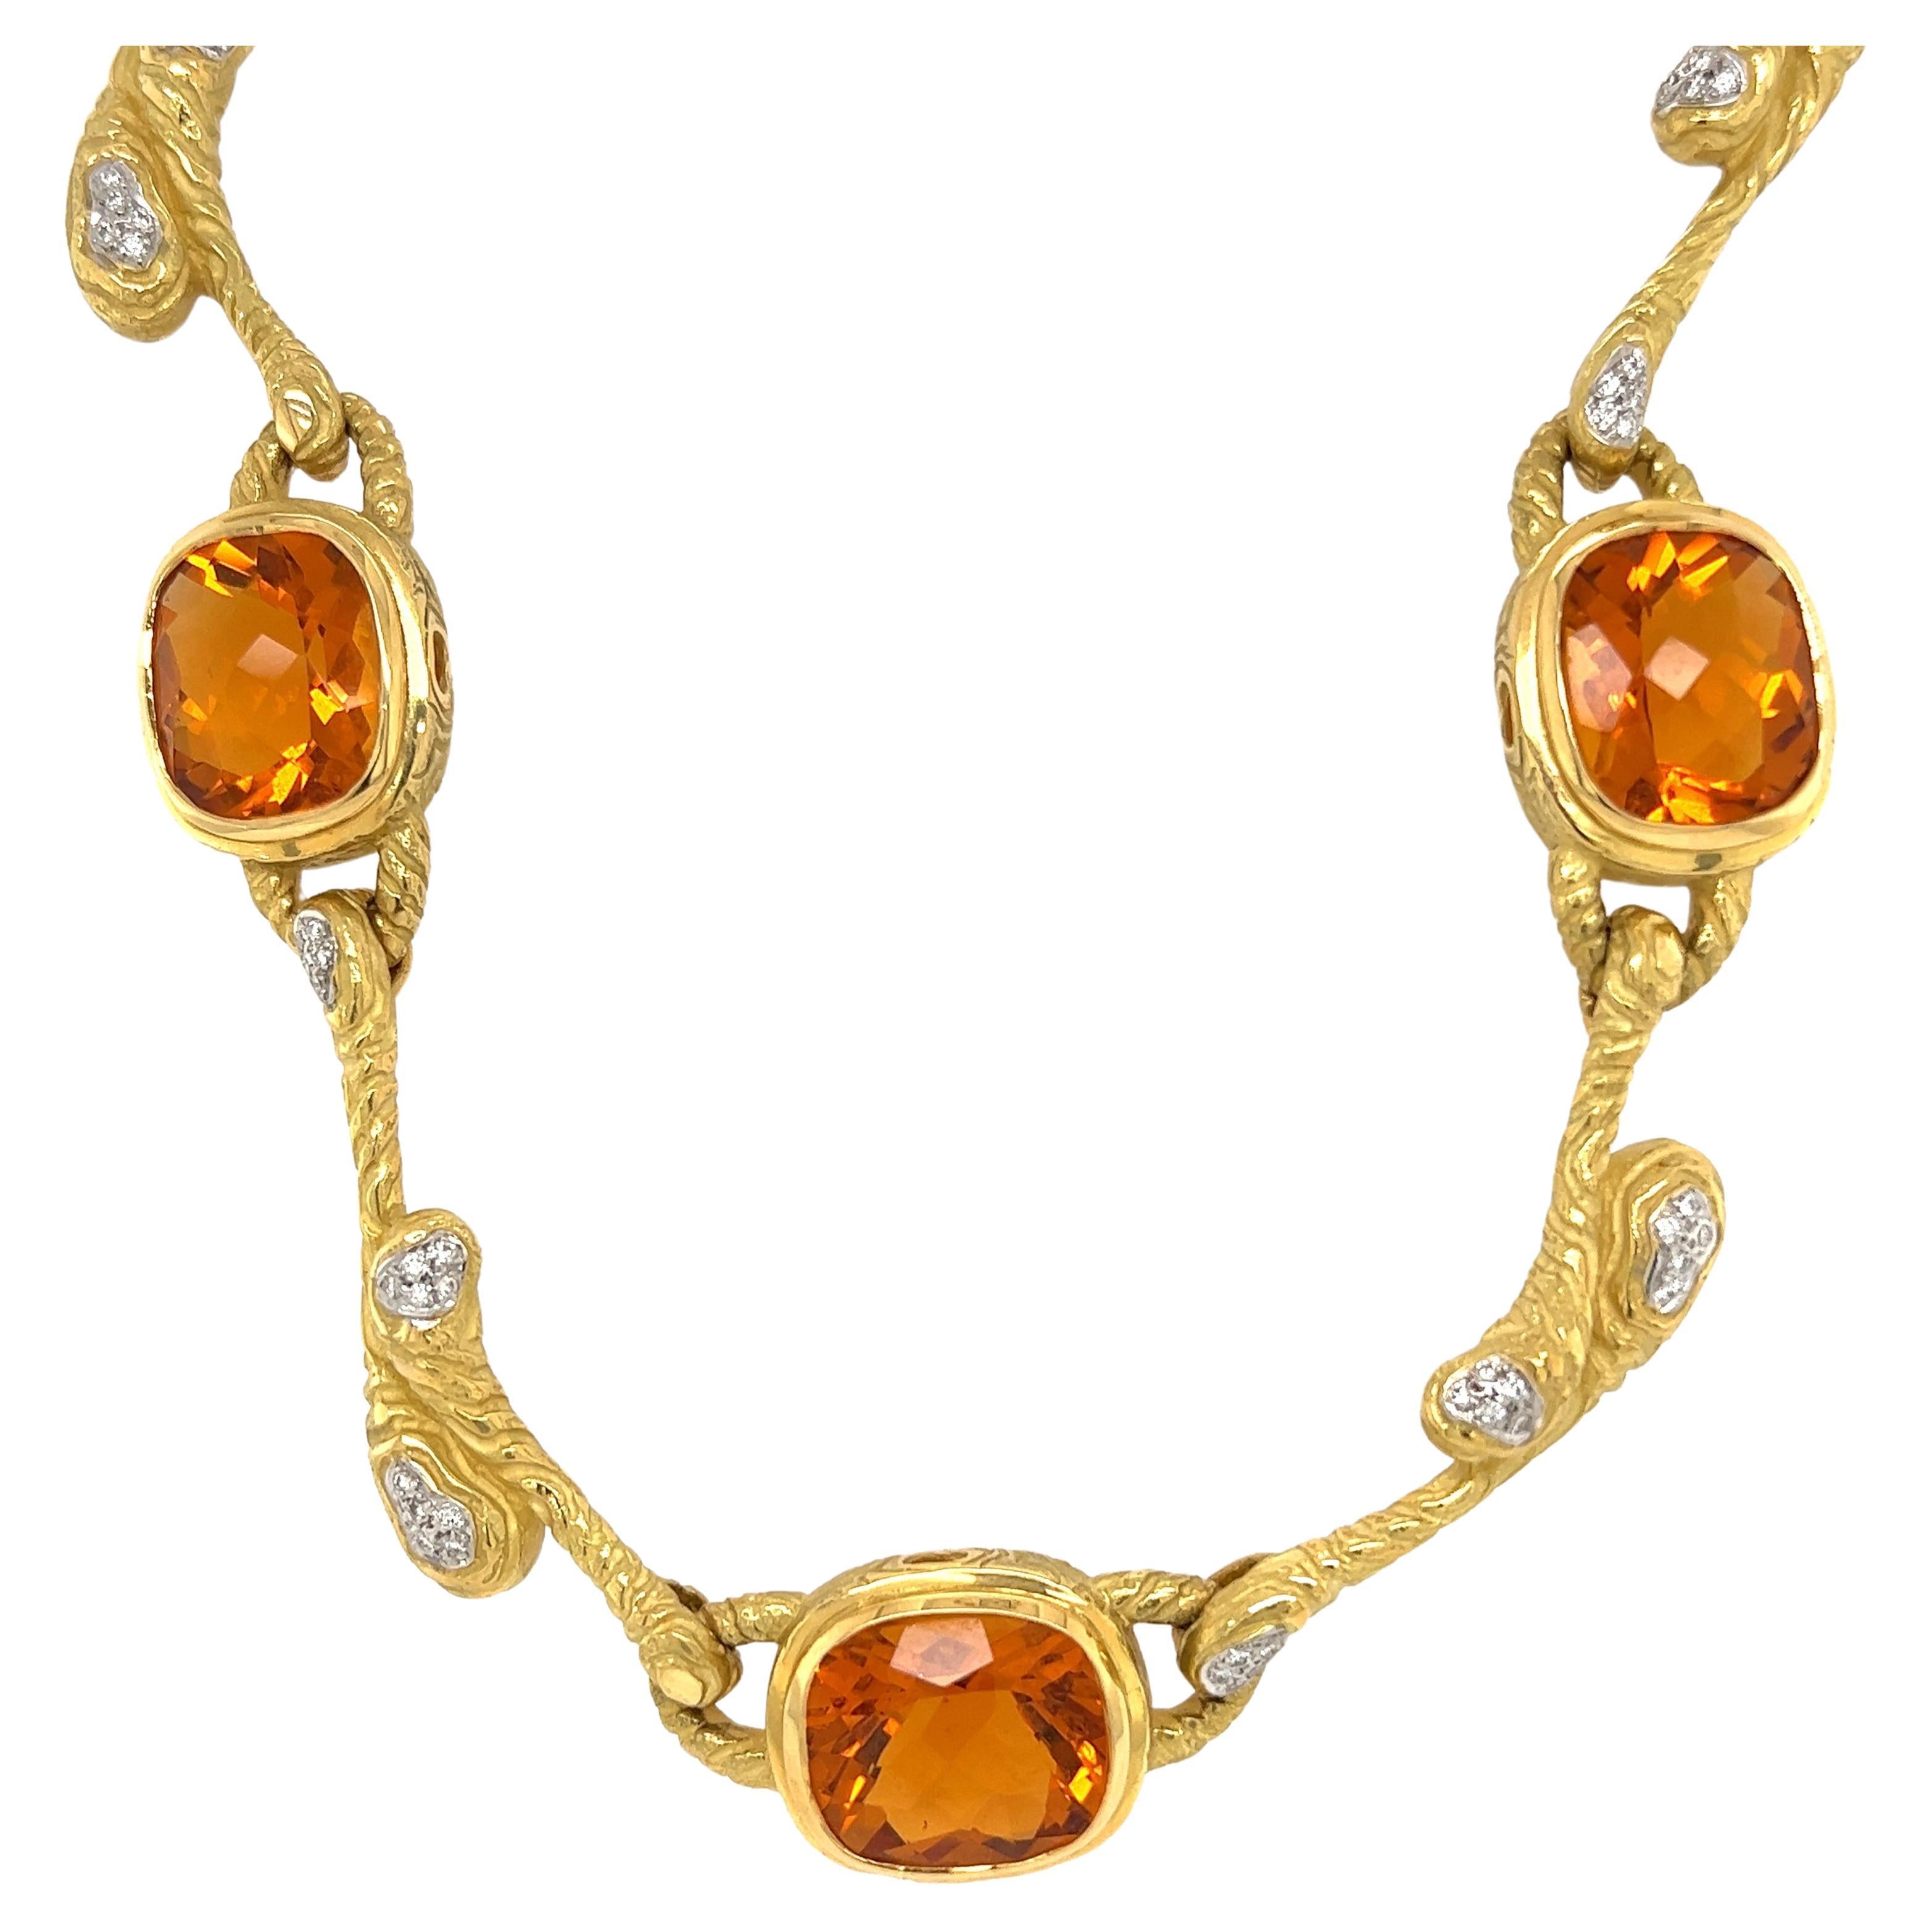 Simply Beautiful! Finely detailed Designer Citrine and Diamond Gold Necklace. Hand set with 3 Citrines, weighing approx. 36.00tcw, interspaced with Scepter designs, set with 60 Round Brilliant-Cut Diamonds, weighing approx. 0.60tcw. Color H; Clarity